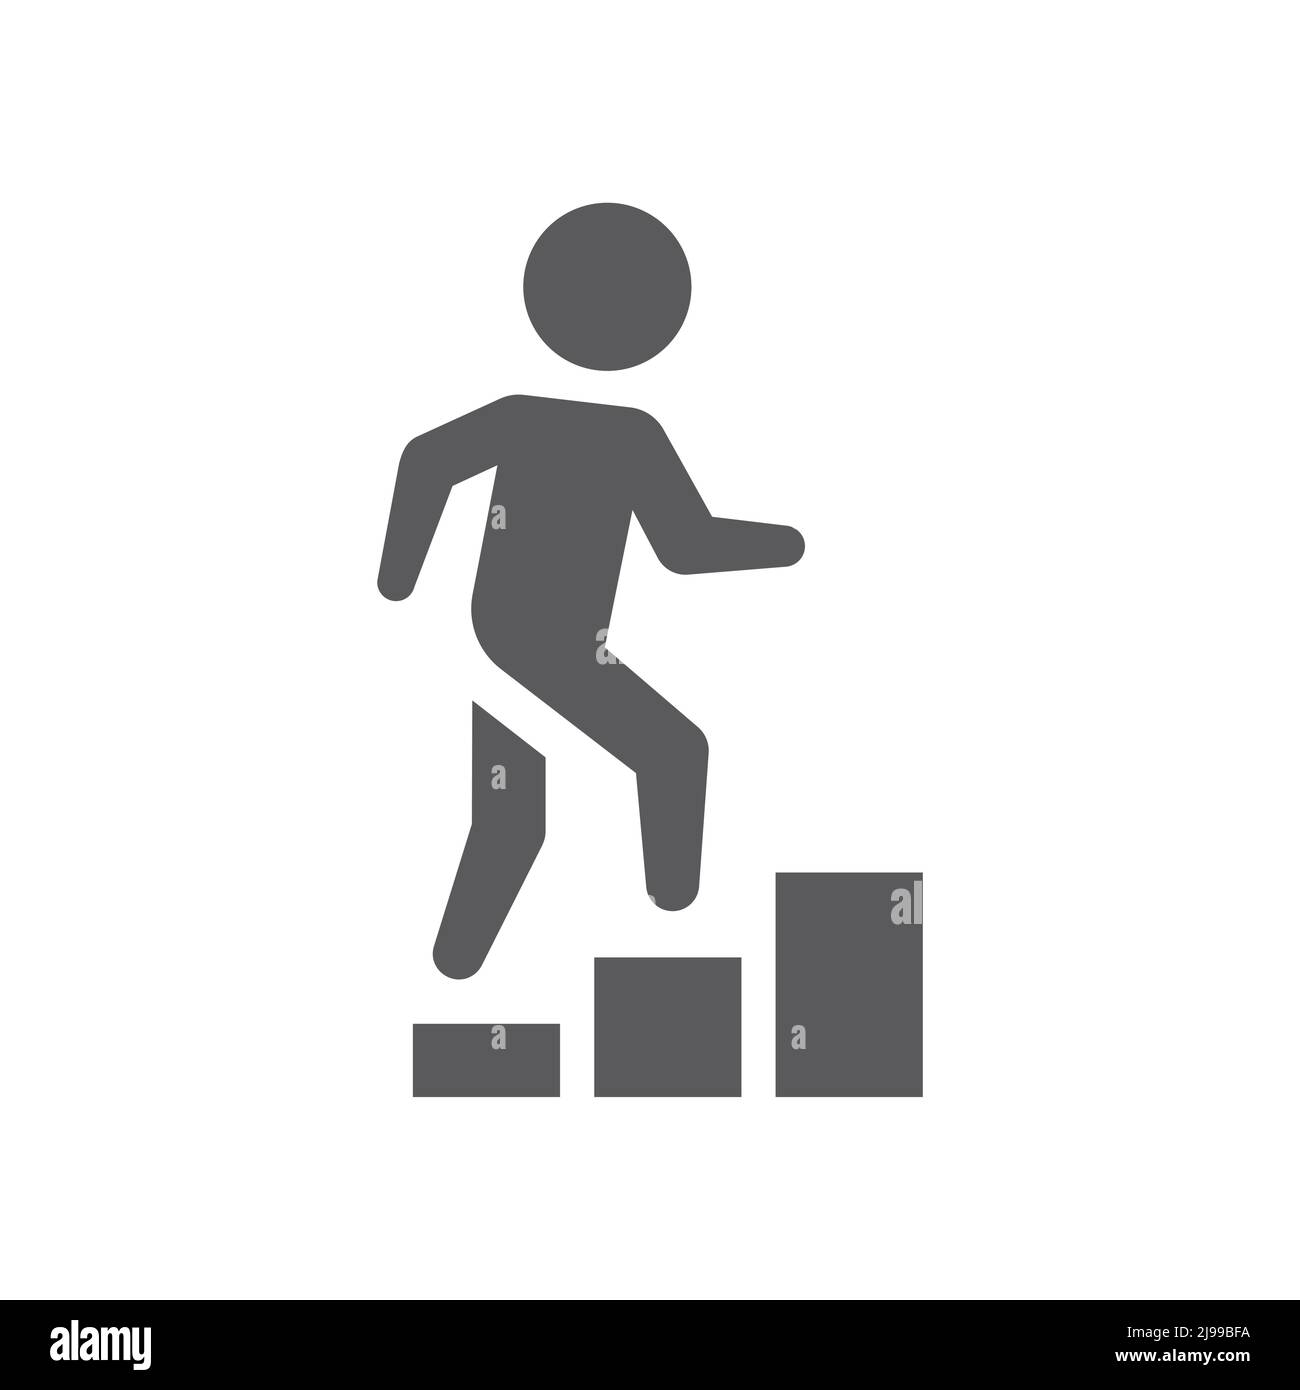 Man climbing stairs black vector icon. Staircase filled symbol. Stock Vector